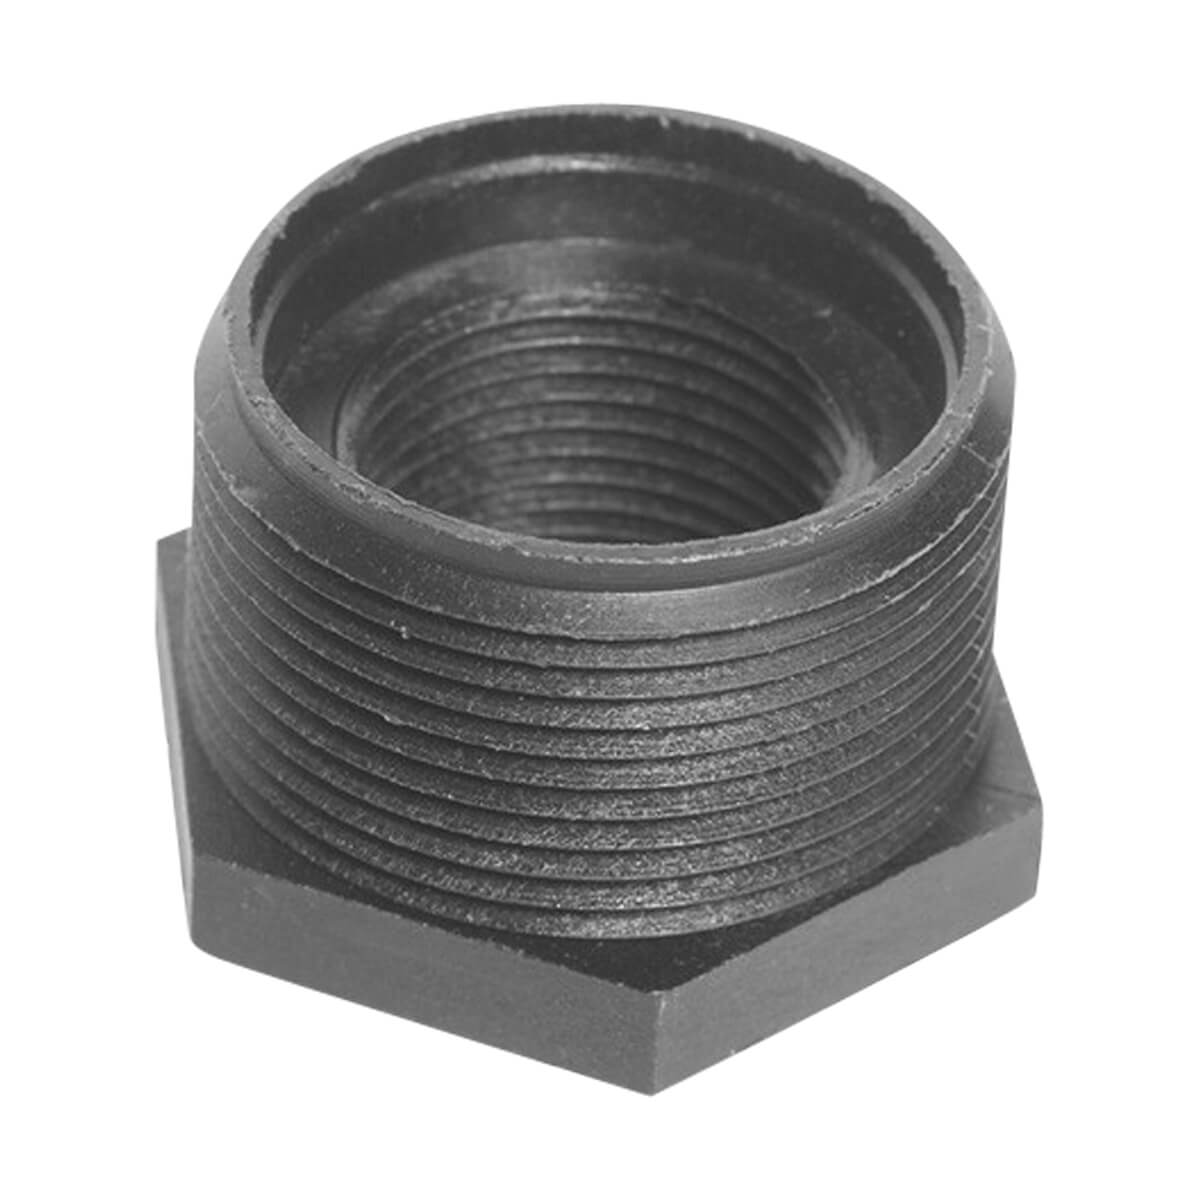 Reducer Bushings MPT x FPT - 1-1/2-in x 1-in